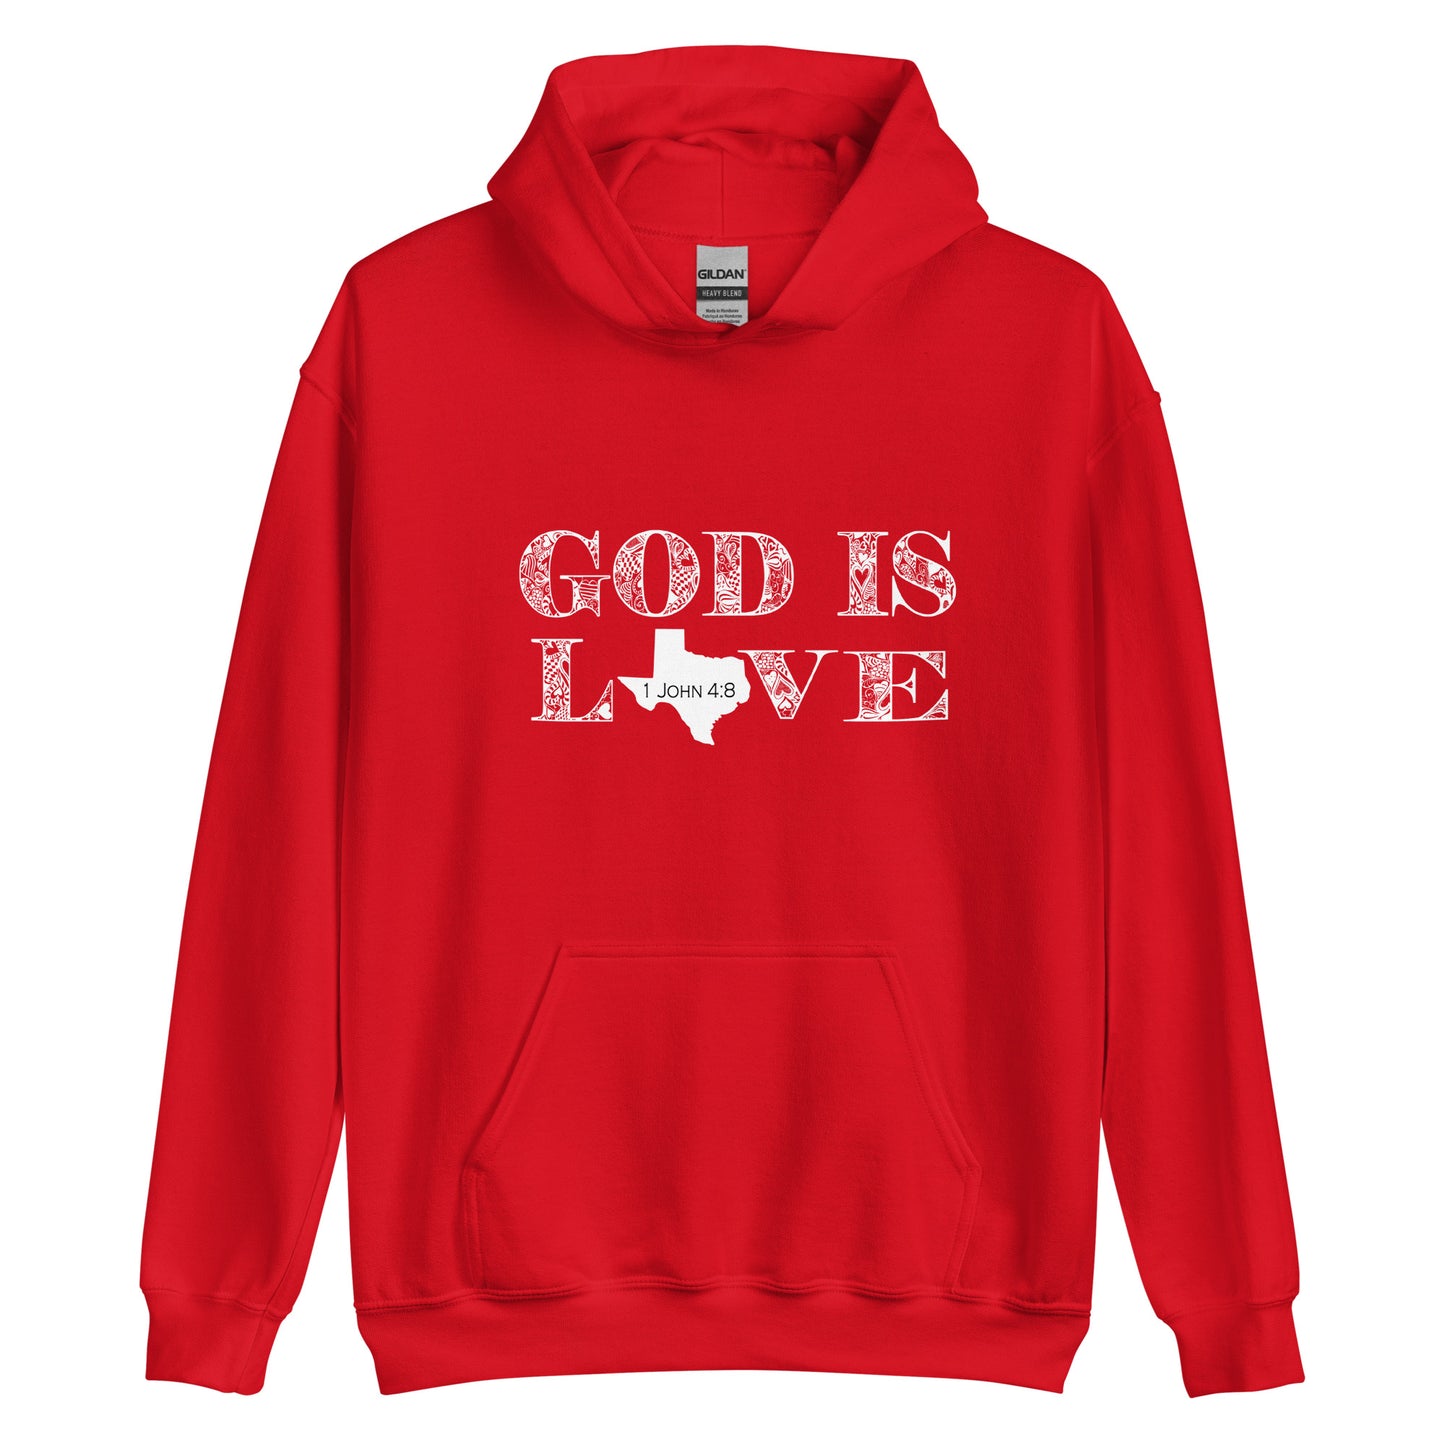 1 John 4:8 God Is Love Unisex Texas Hoodie in Red - front view with hood down